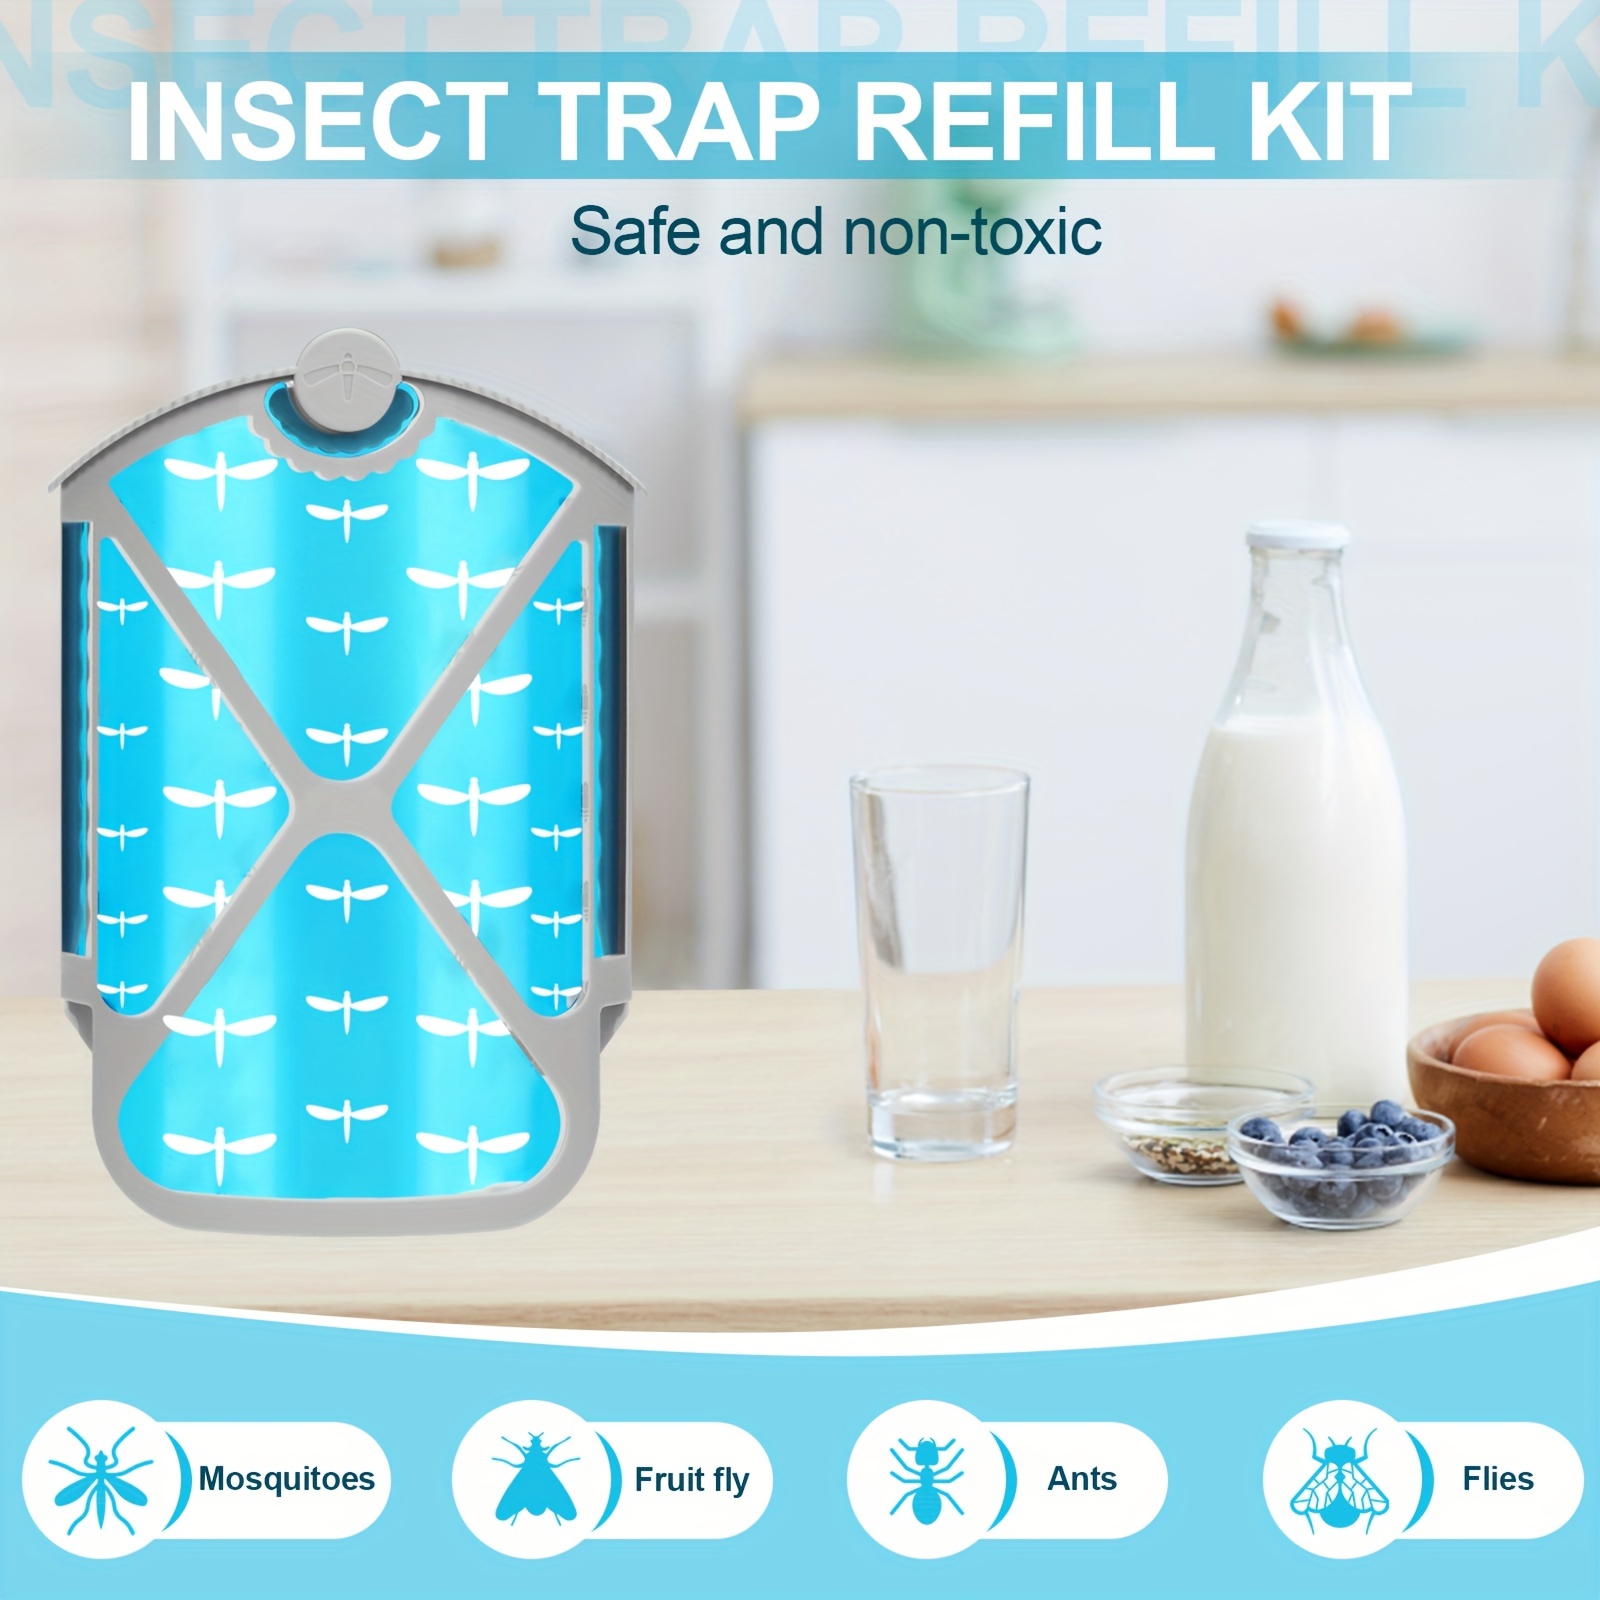 Zevo Flying Insect Trap, Fly Trap Refill Cartridges (2 Refill Cartridges)